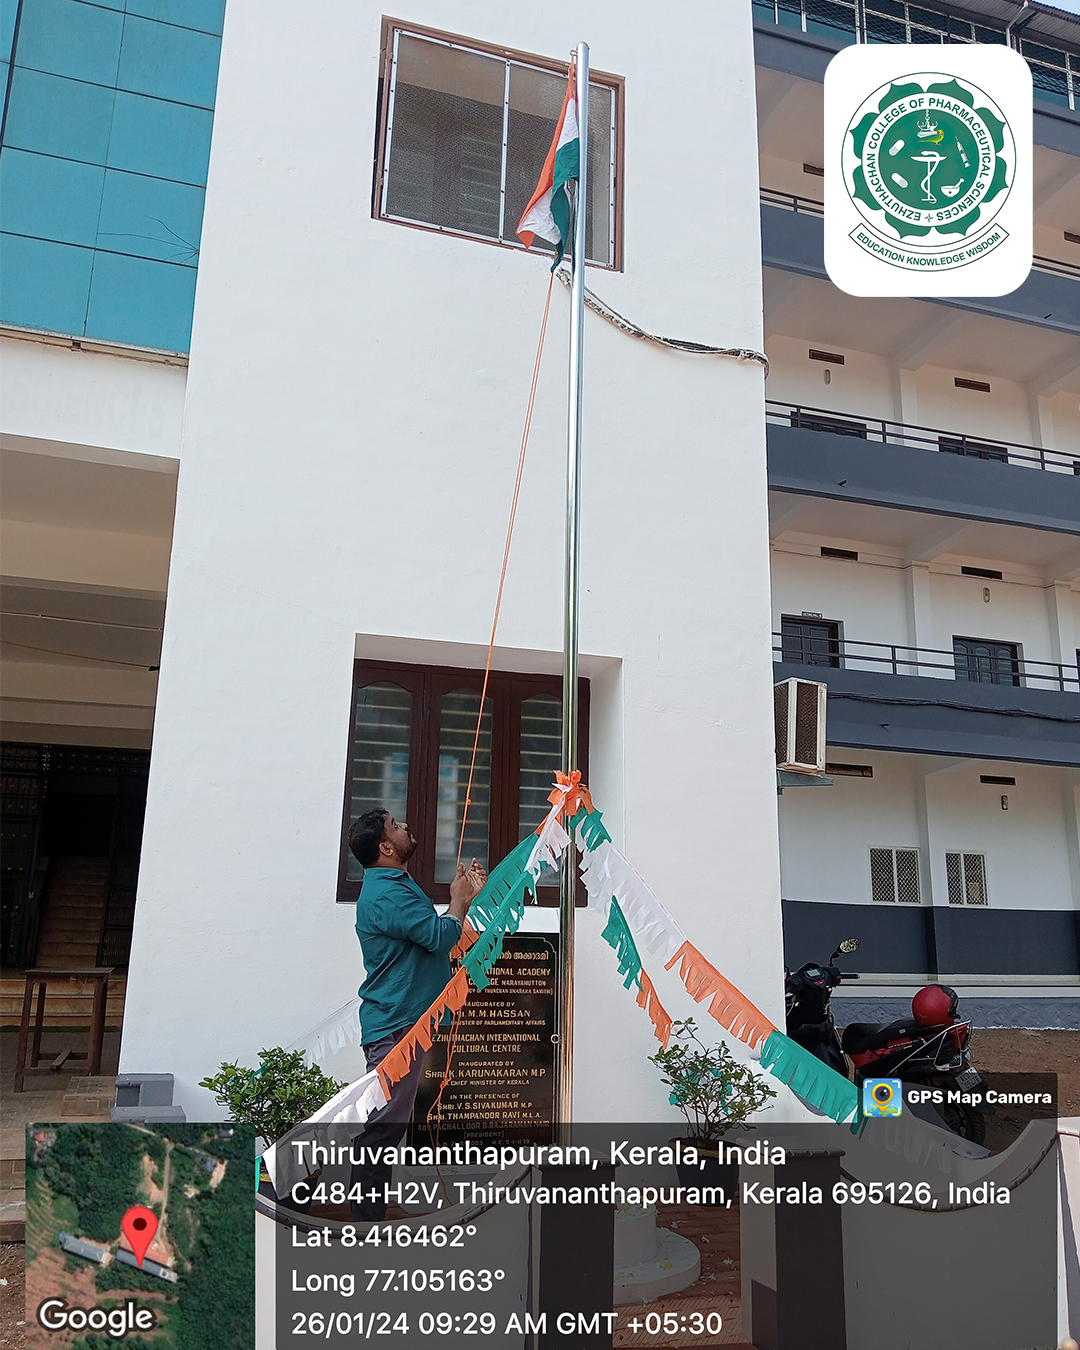 Flag hosting and distribution of sweets on 75th Republic day at ECPS by NSS Unit